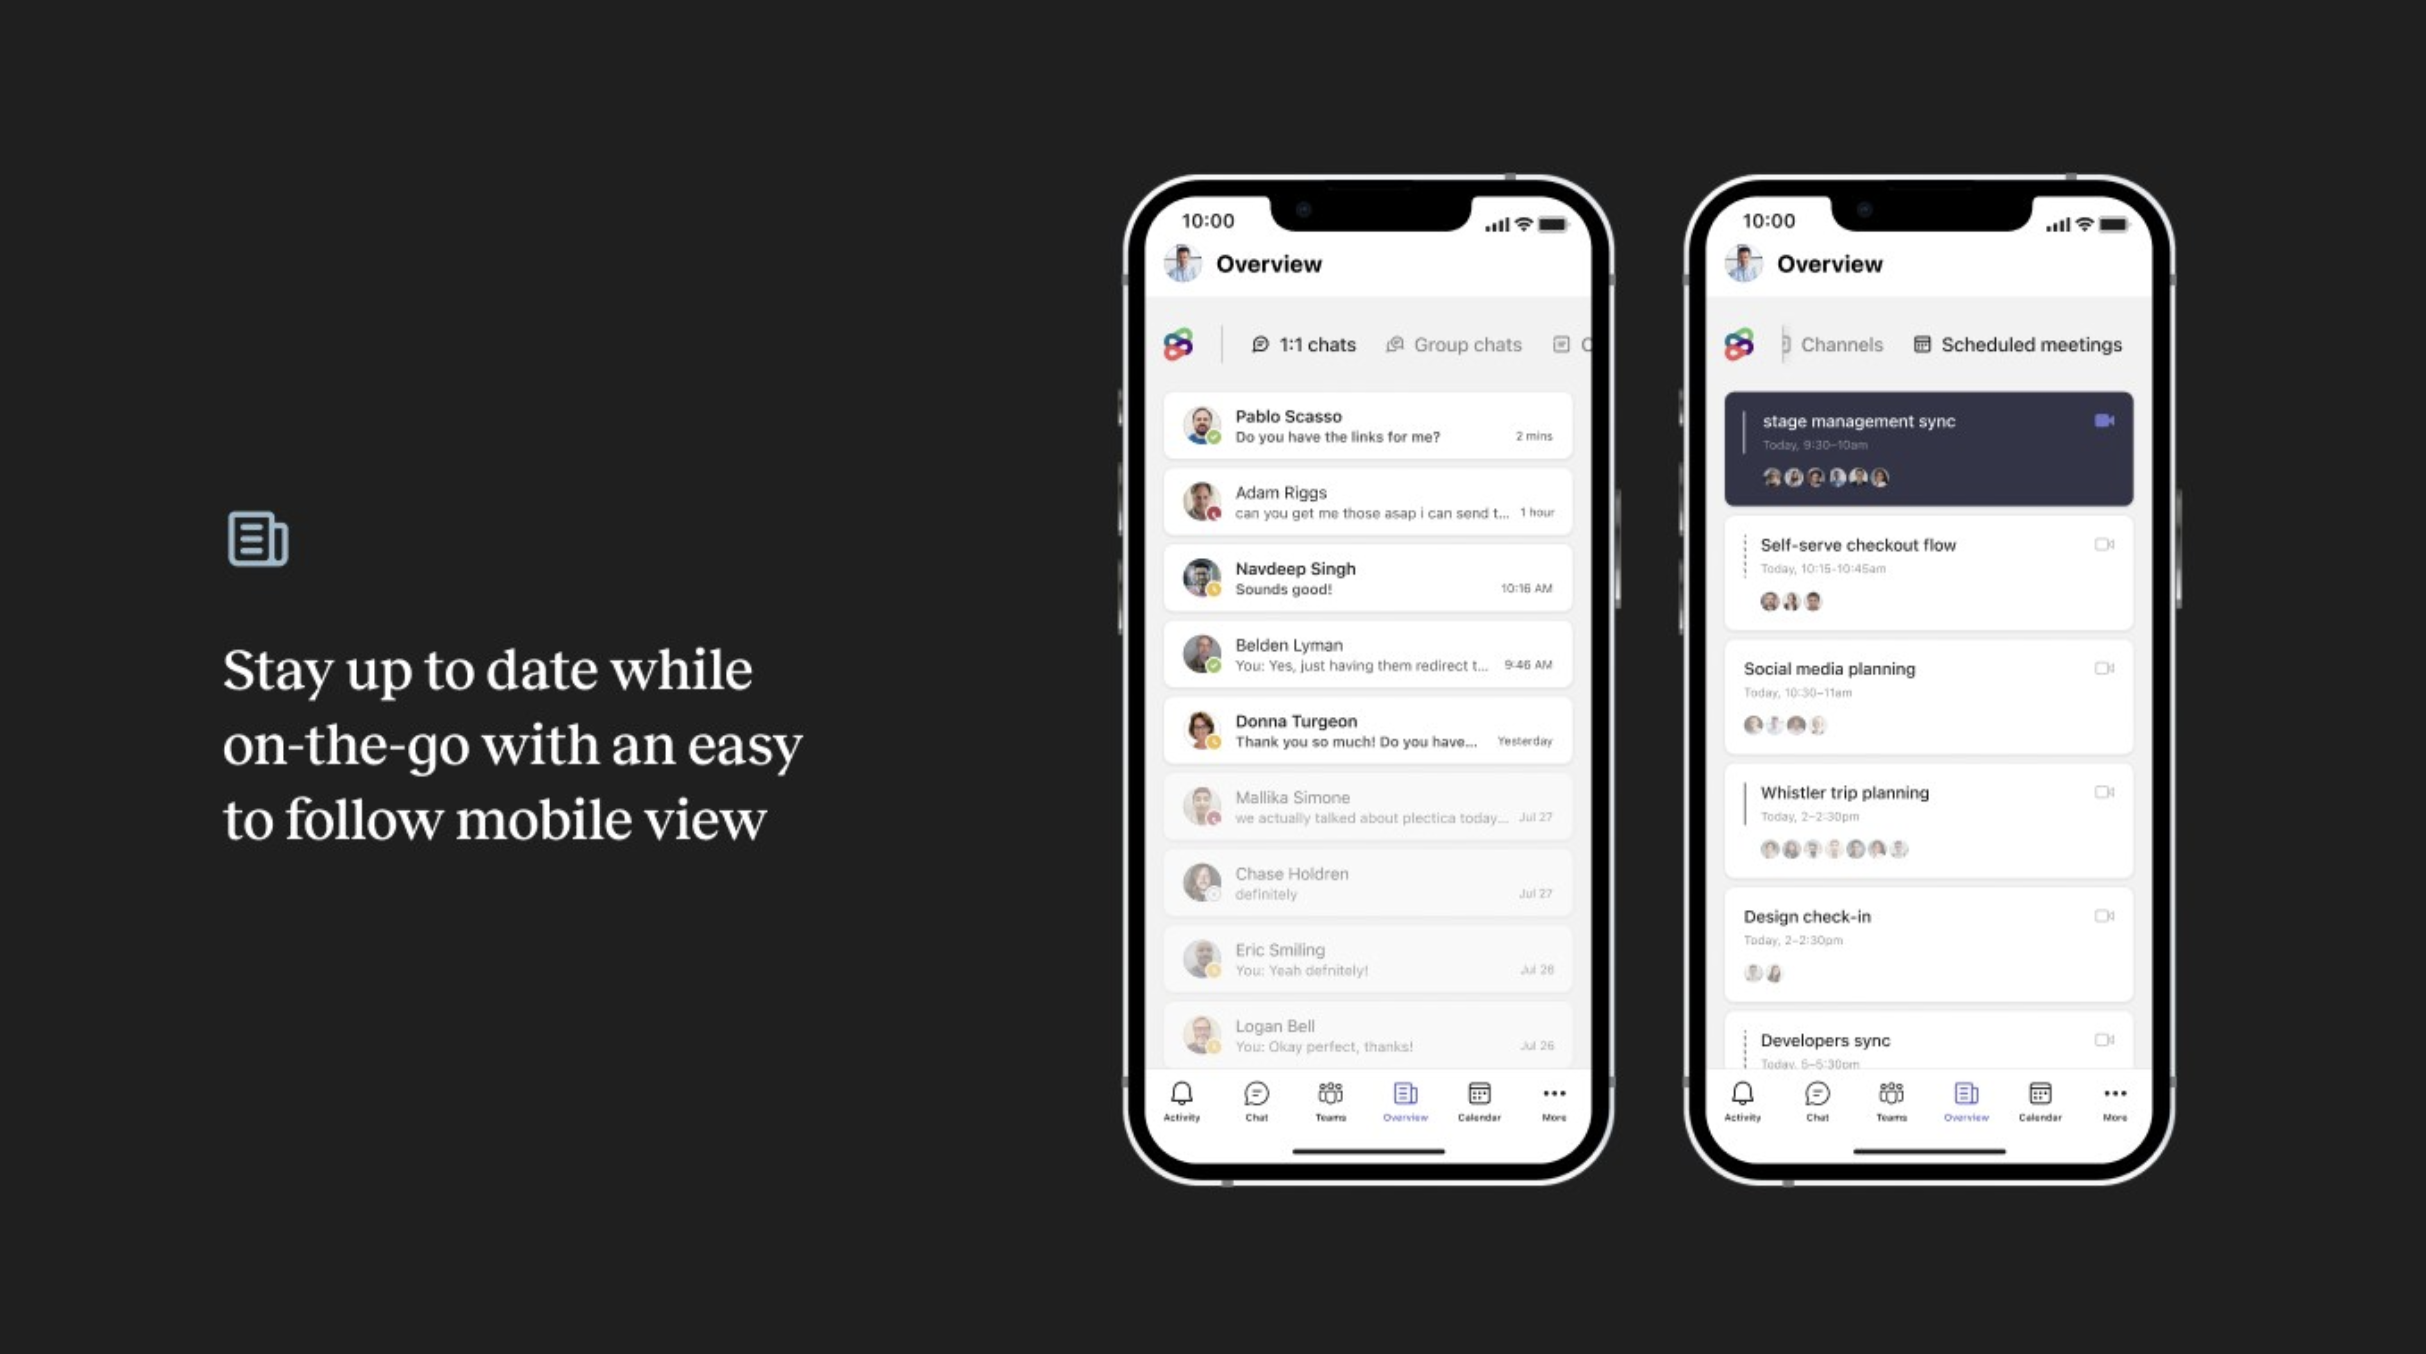 Stay up to date while on the go with a mobile view